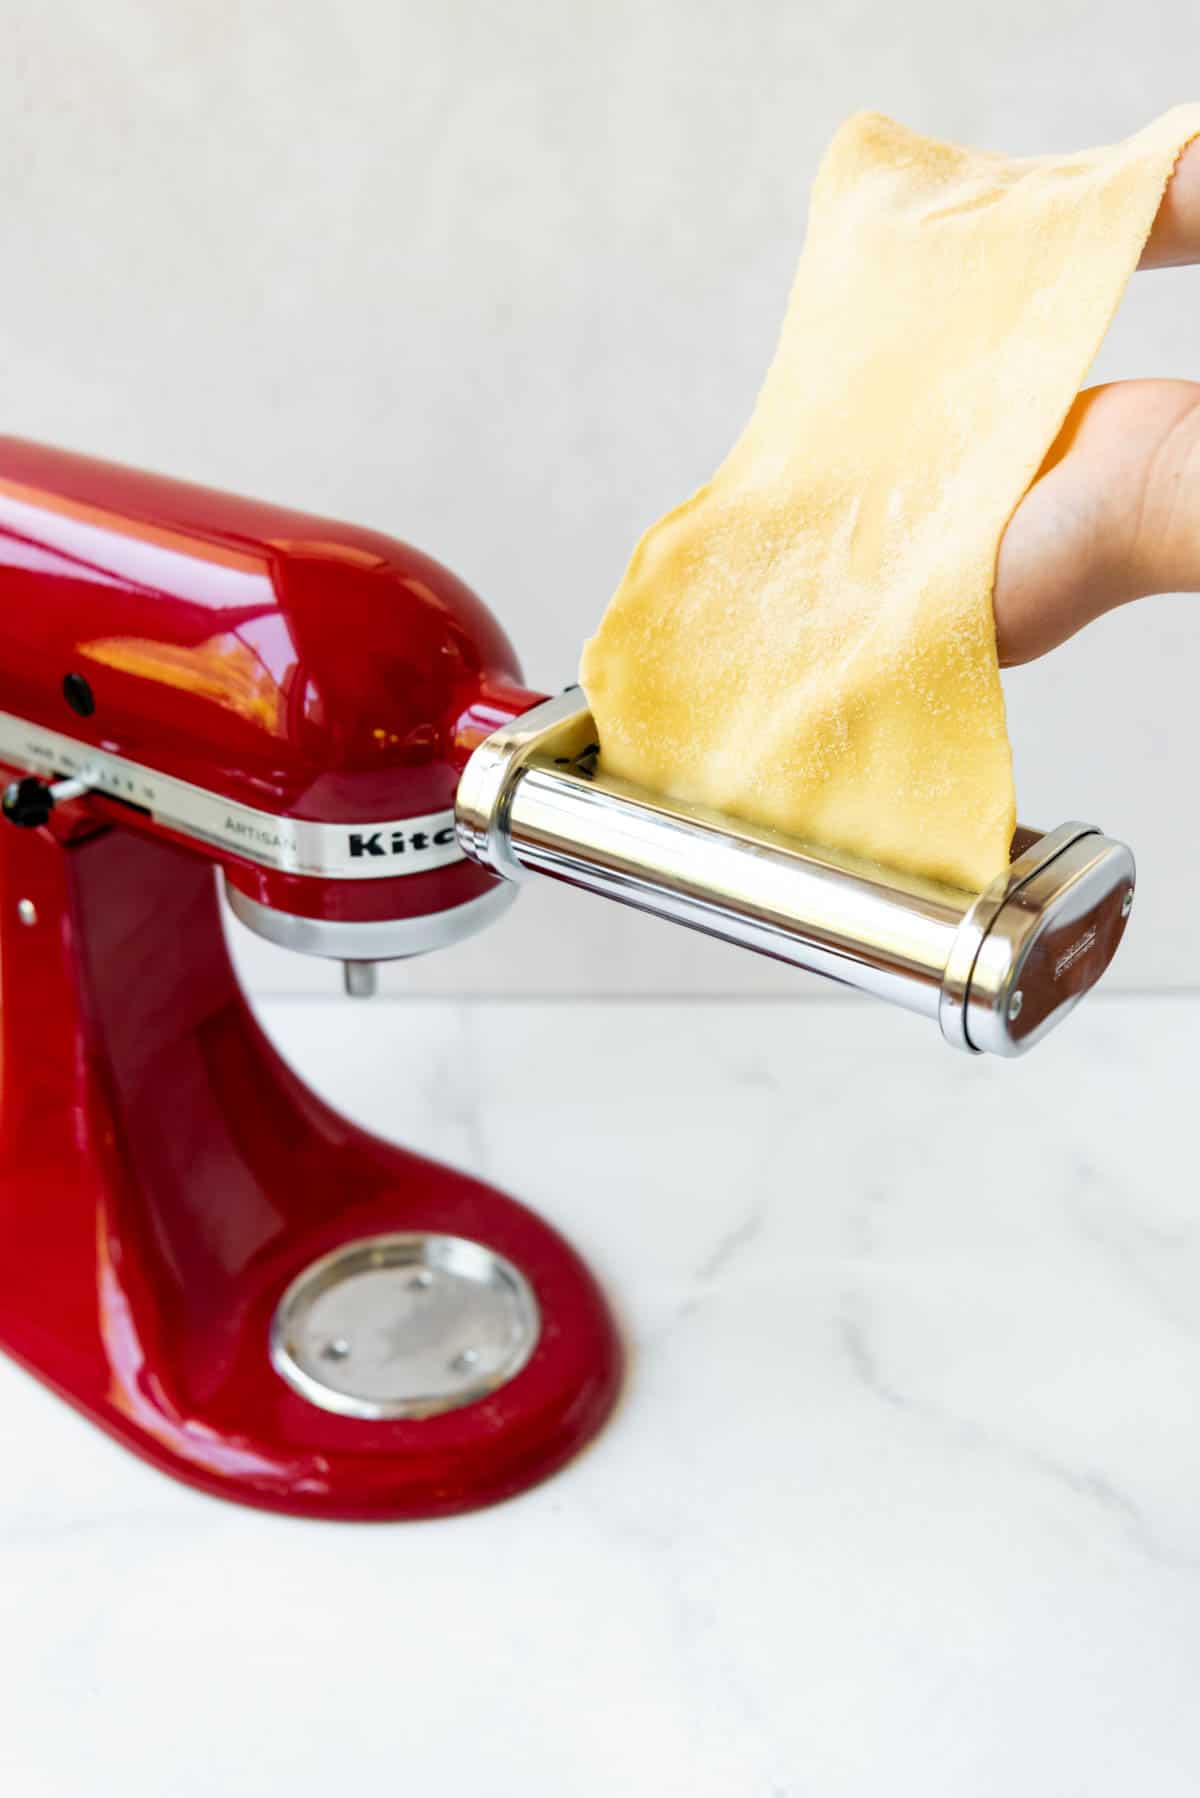 Feeding a thin sheet of fresh pasta into a pasta roller attachment for cutting fettuccine pasta noodles.